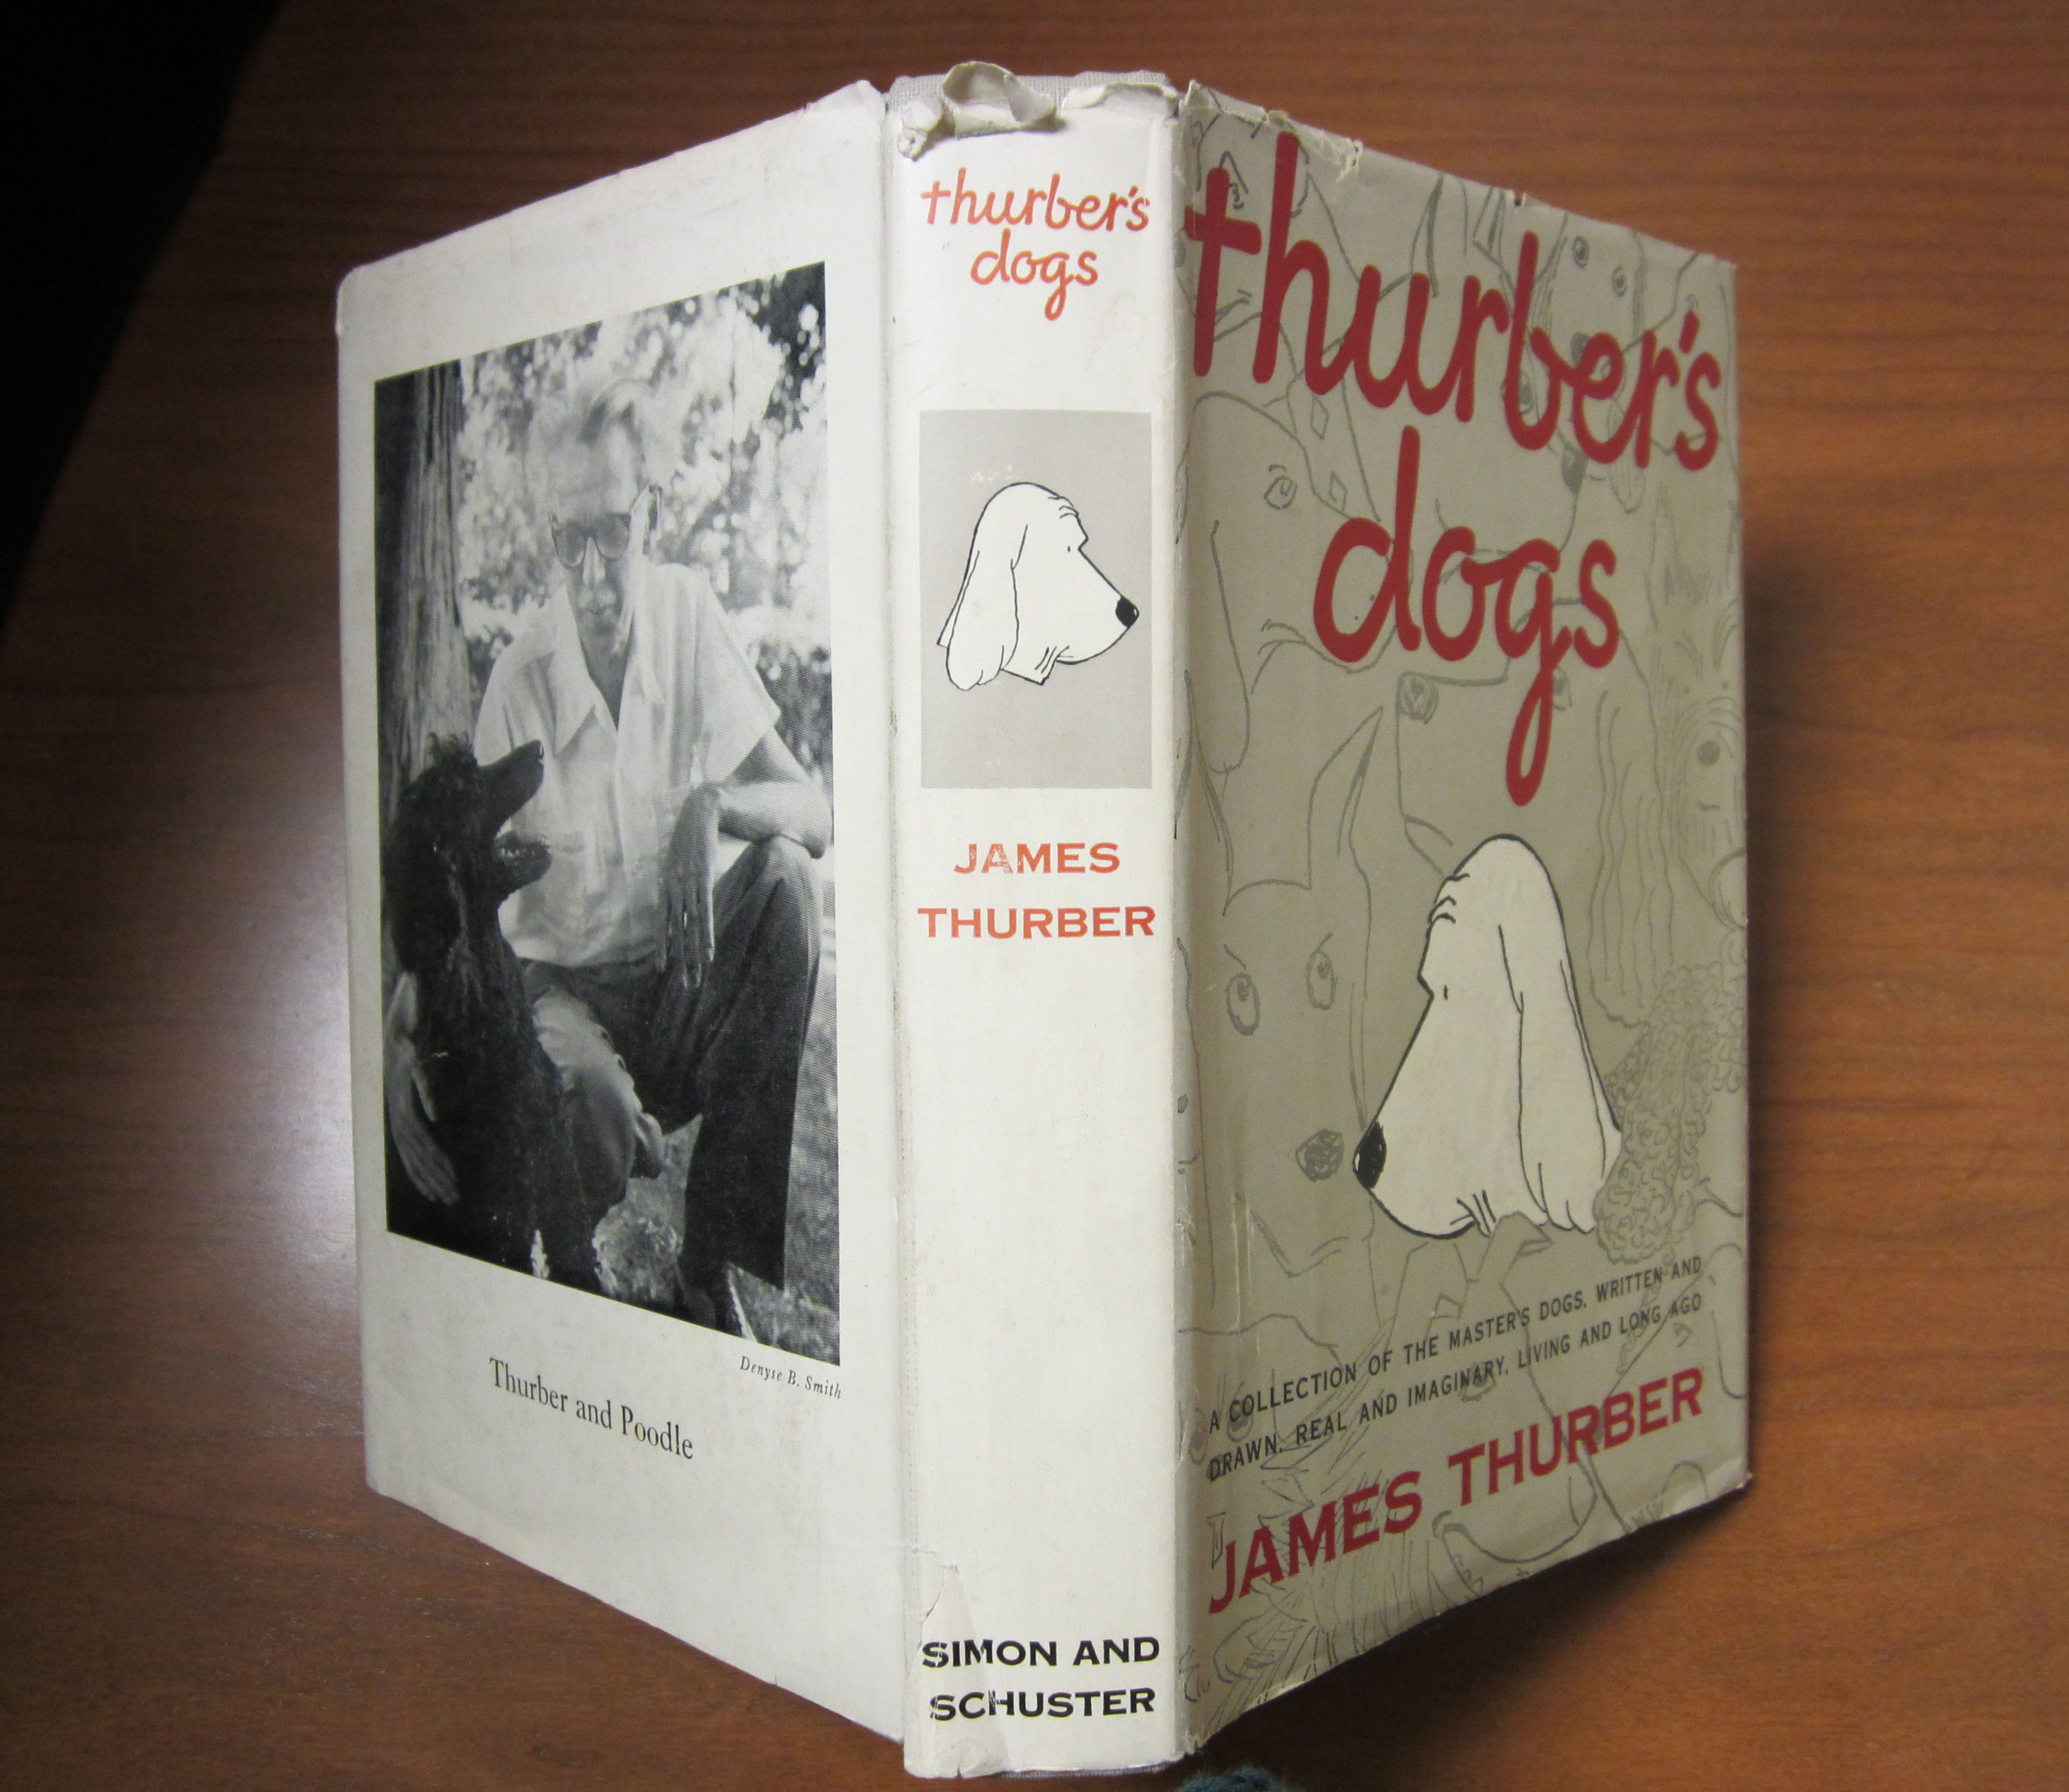 Thurber's Dogs: A Collection of the Master's Dogs, Written and Drawn, Real and Imaginary, Living and Long Ago, 1955. (PS3539 .H94 T54 1955. Gift of Mr. Charles Barham, Jr. Photograph by Donna Stapley.).